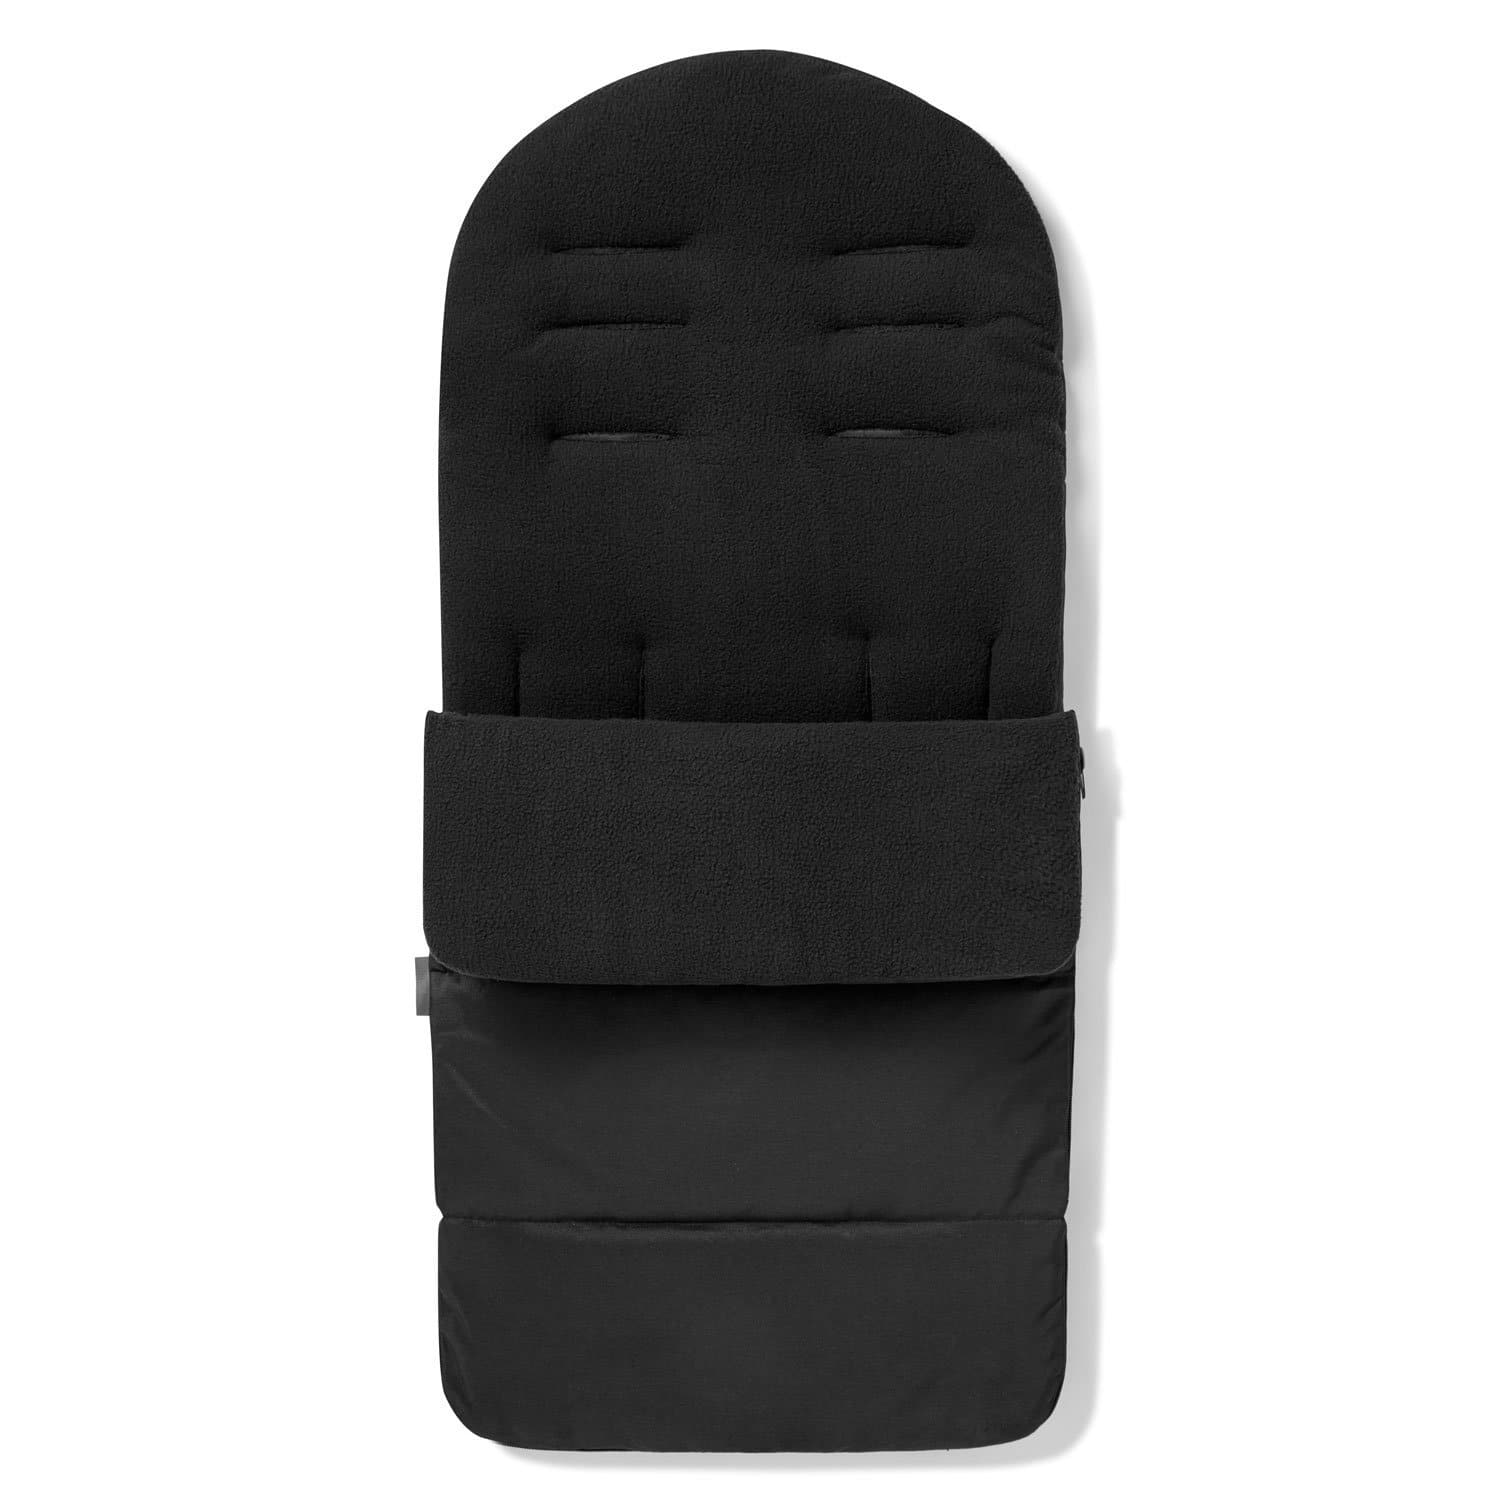 Premium Footmuff / Cosy Toes Compatible with Egg - Black Jack / Fits All Models | For Your Little One